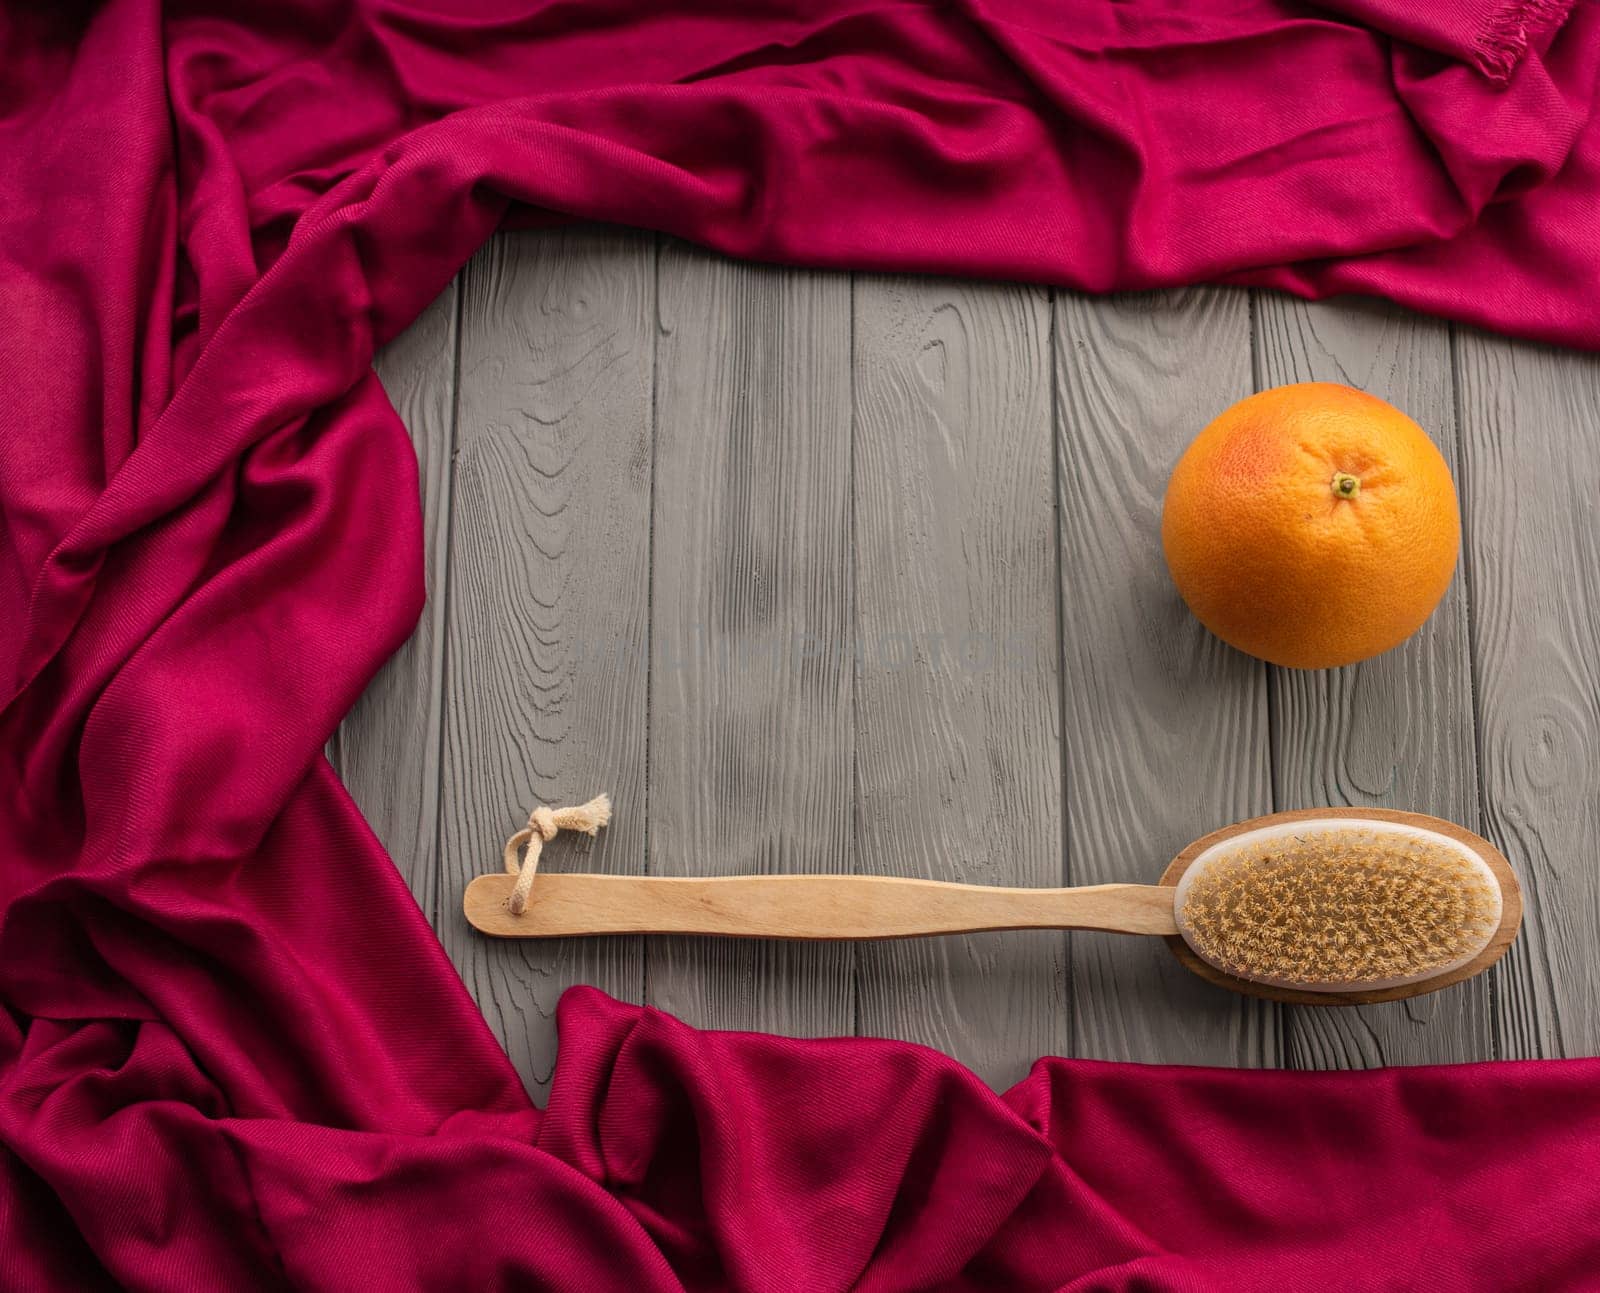 skin preparation body beach anti-cellulite massage cactus brush big orange peel. Summer background template mockup free space pattern composition sample text. Top view above grey wooden background